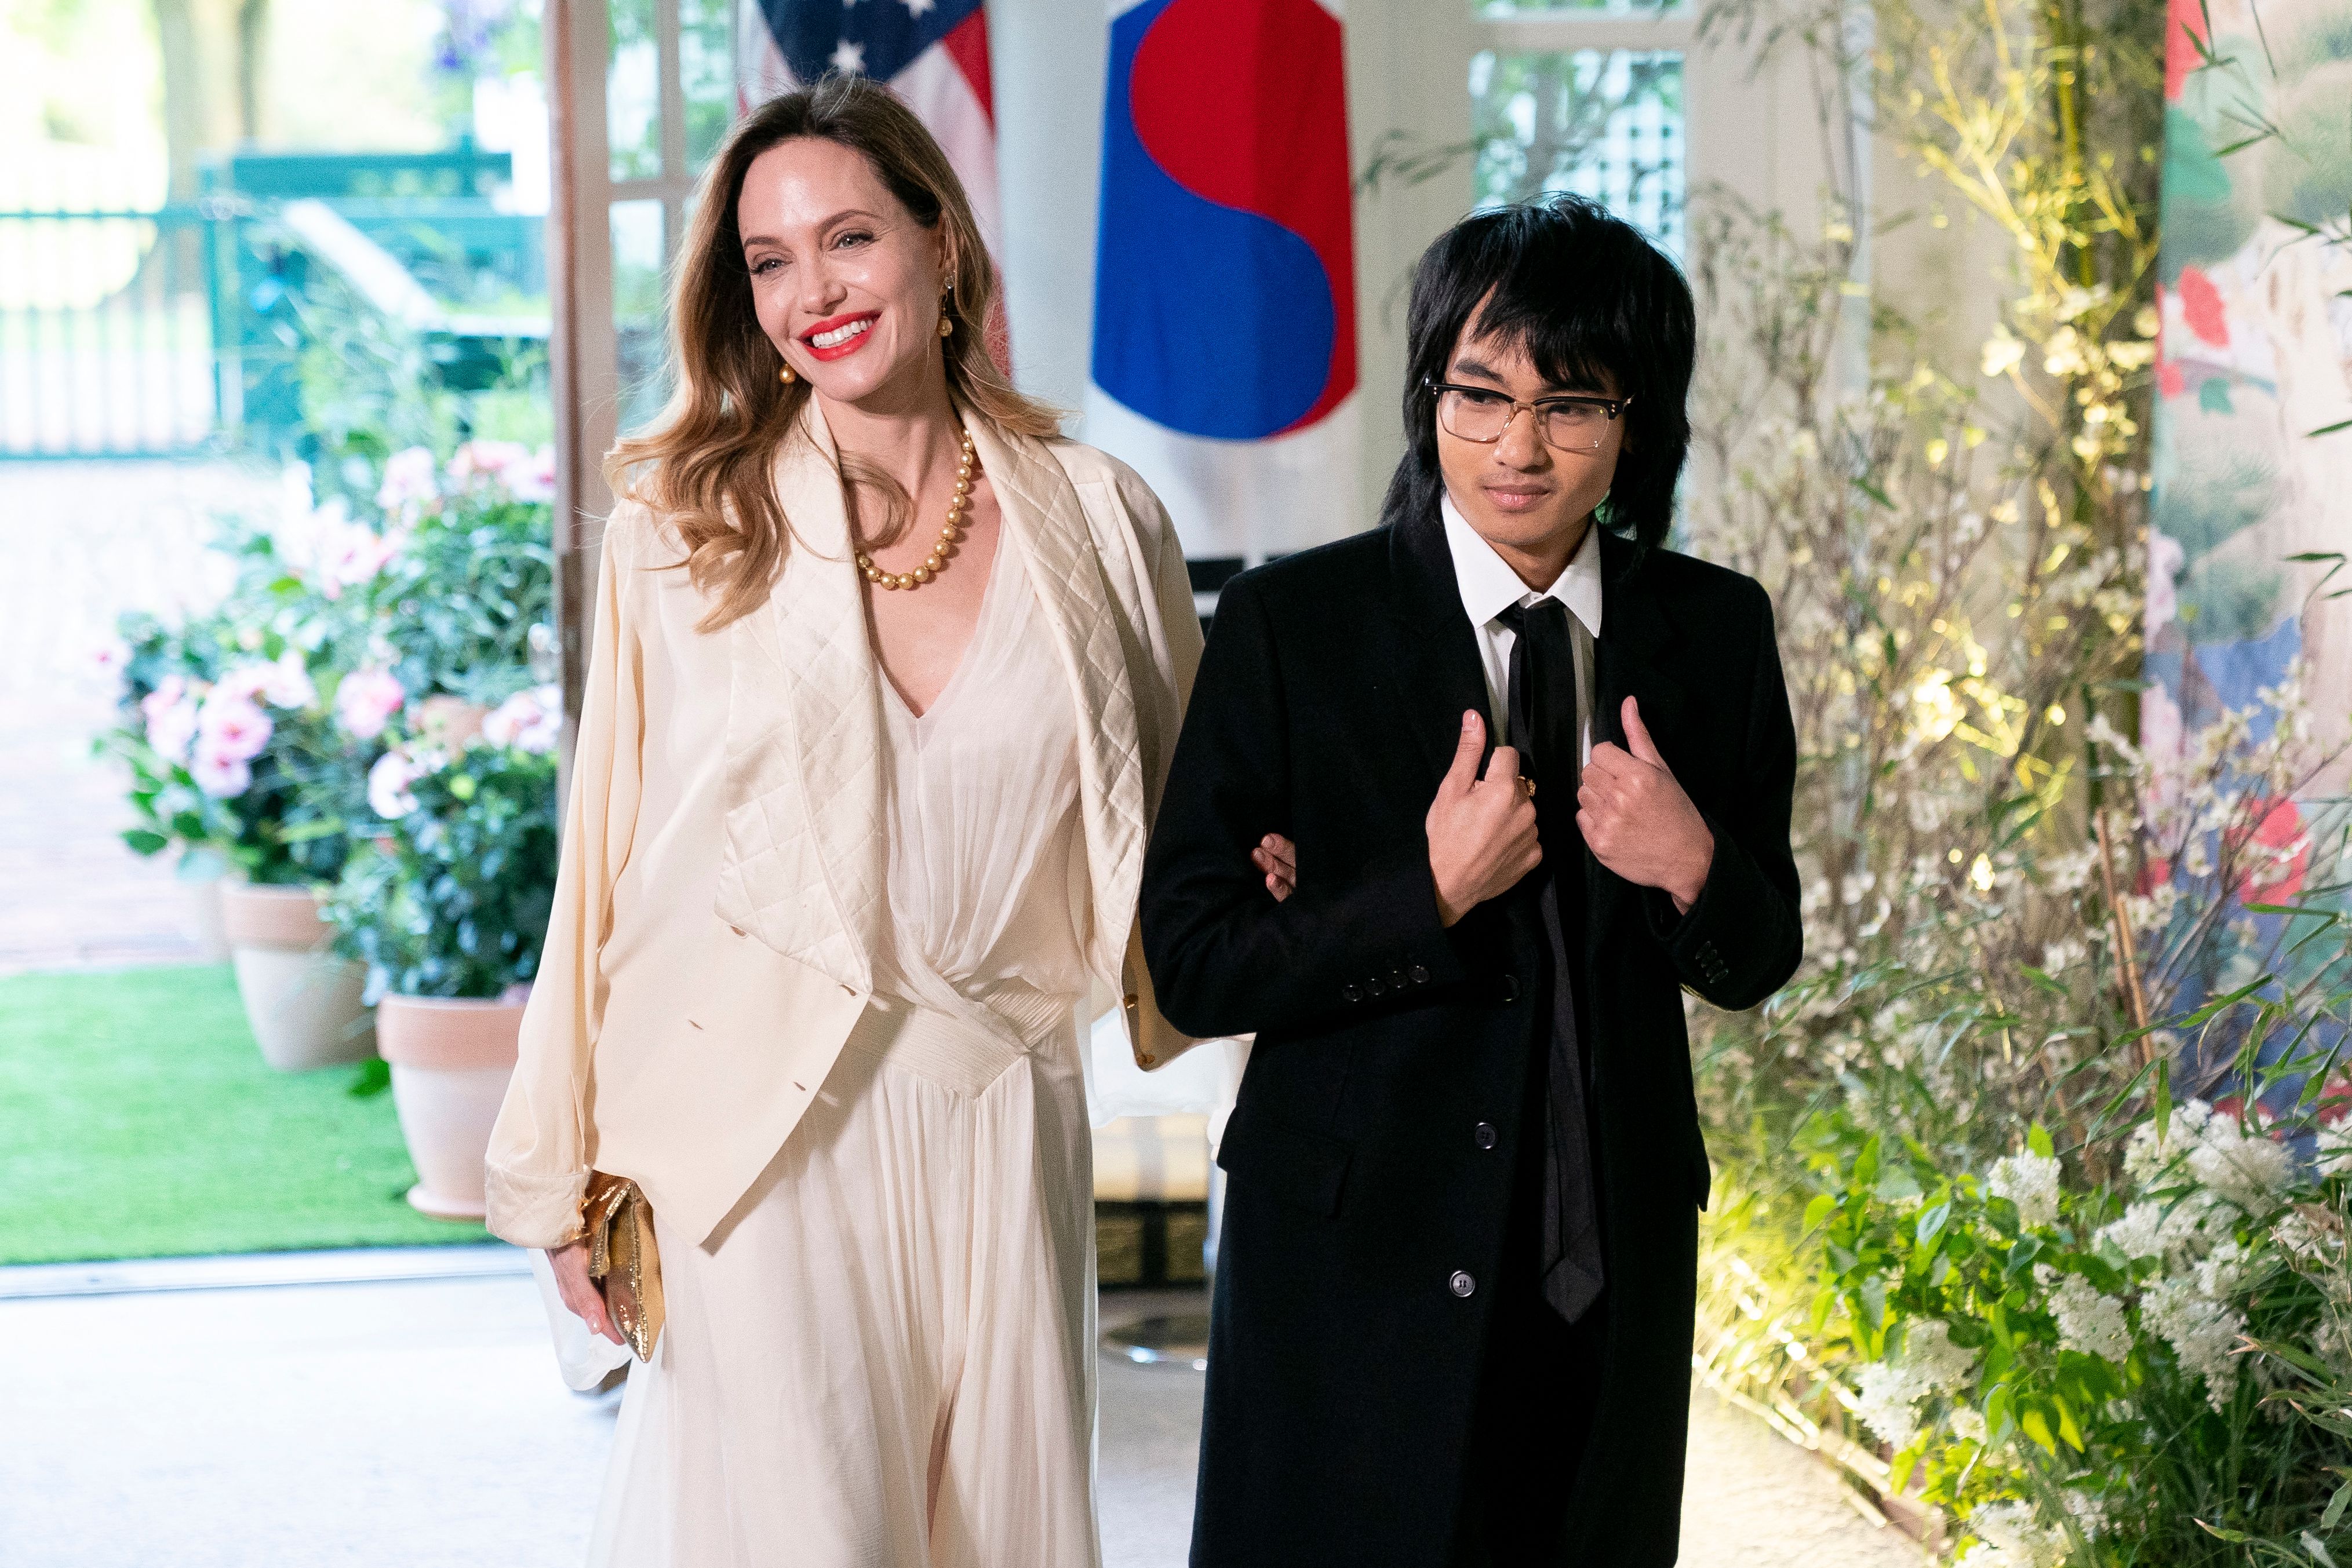 Angelina Jolie and Maddox at a State Dinner in Washington, DC, on April 26, 2023 | Source: Getty Images